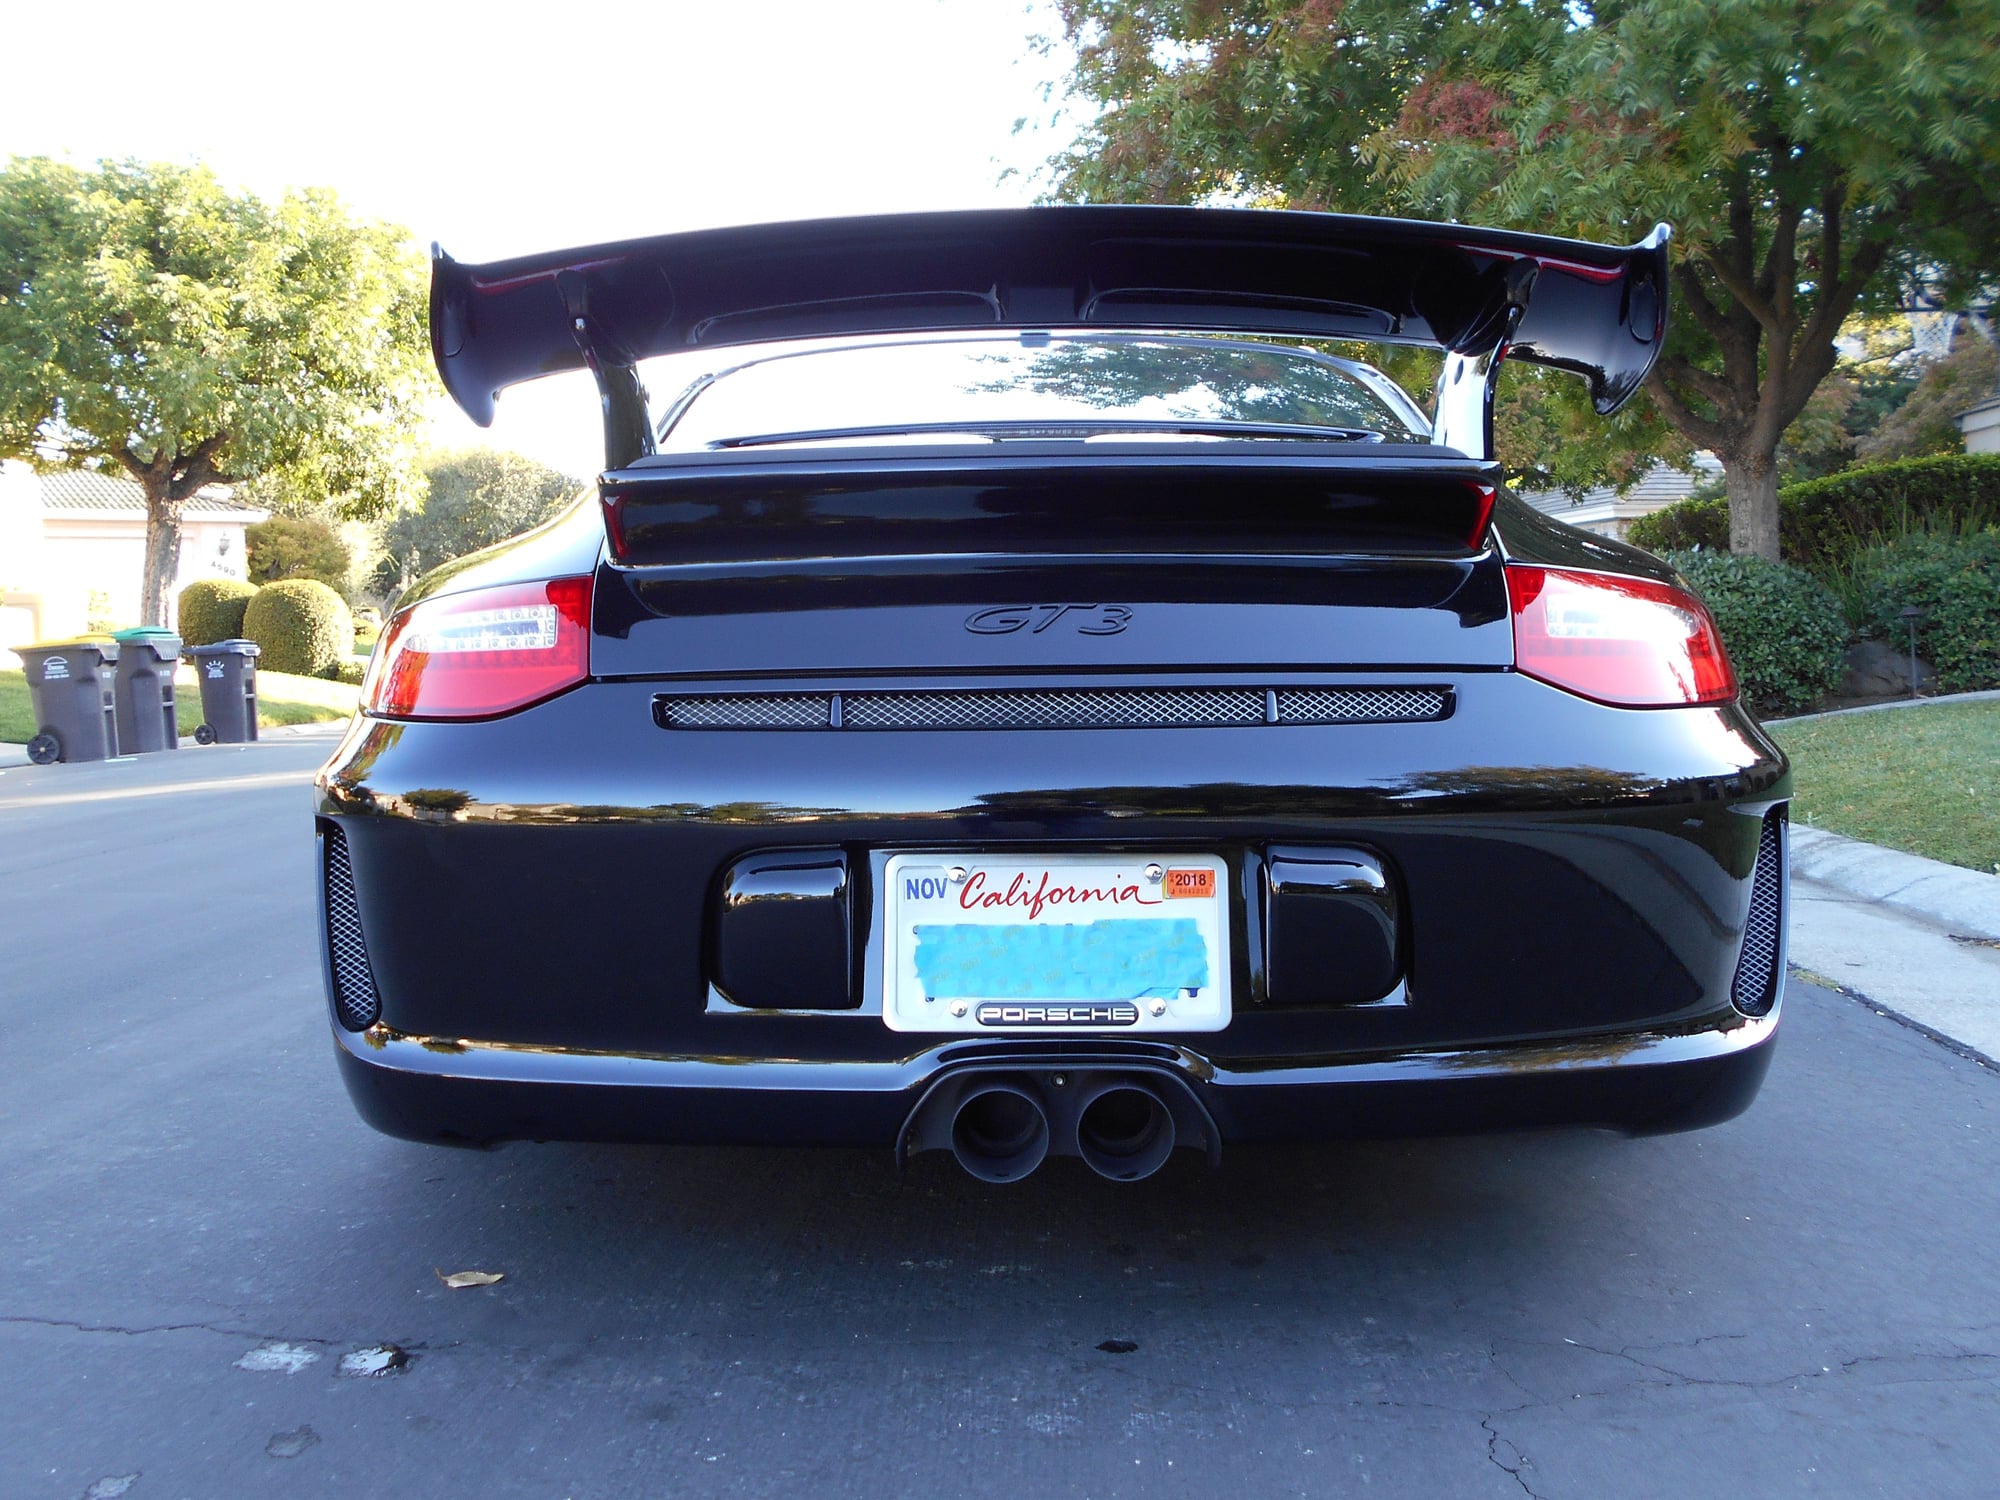 2010 Porsche GT3 - Porshe 2010 997.2 GT3 - Used - VIN WP0AC2A97AS783425 - 14,675 Miles - 6 cyl - 2WD - Manual - Coupe - Black - Stockton, CA 95205, United States